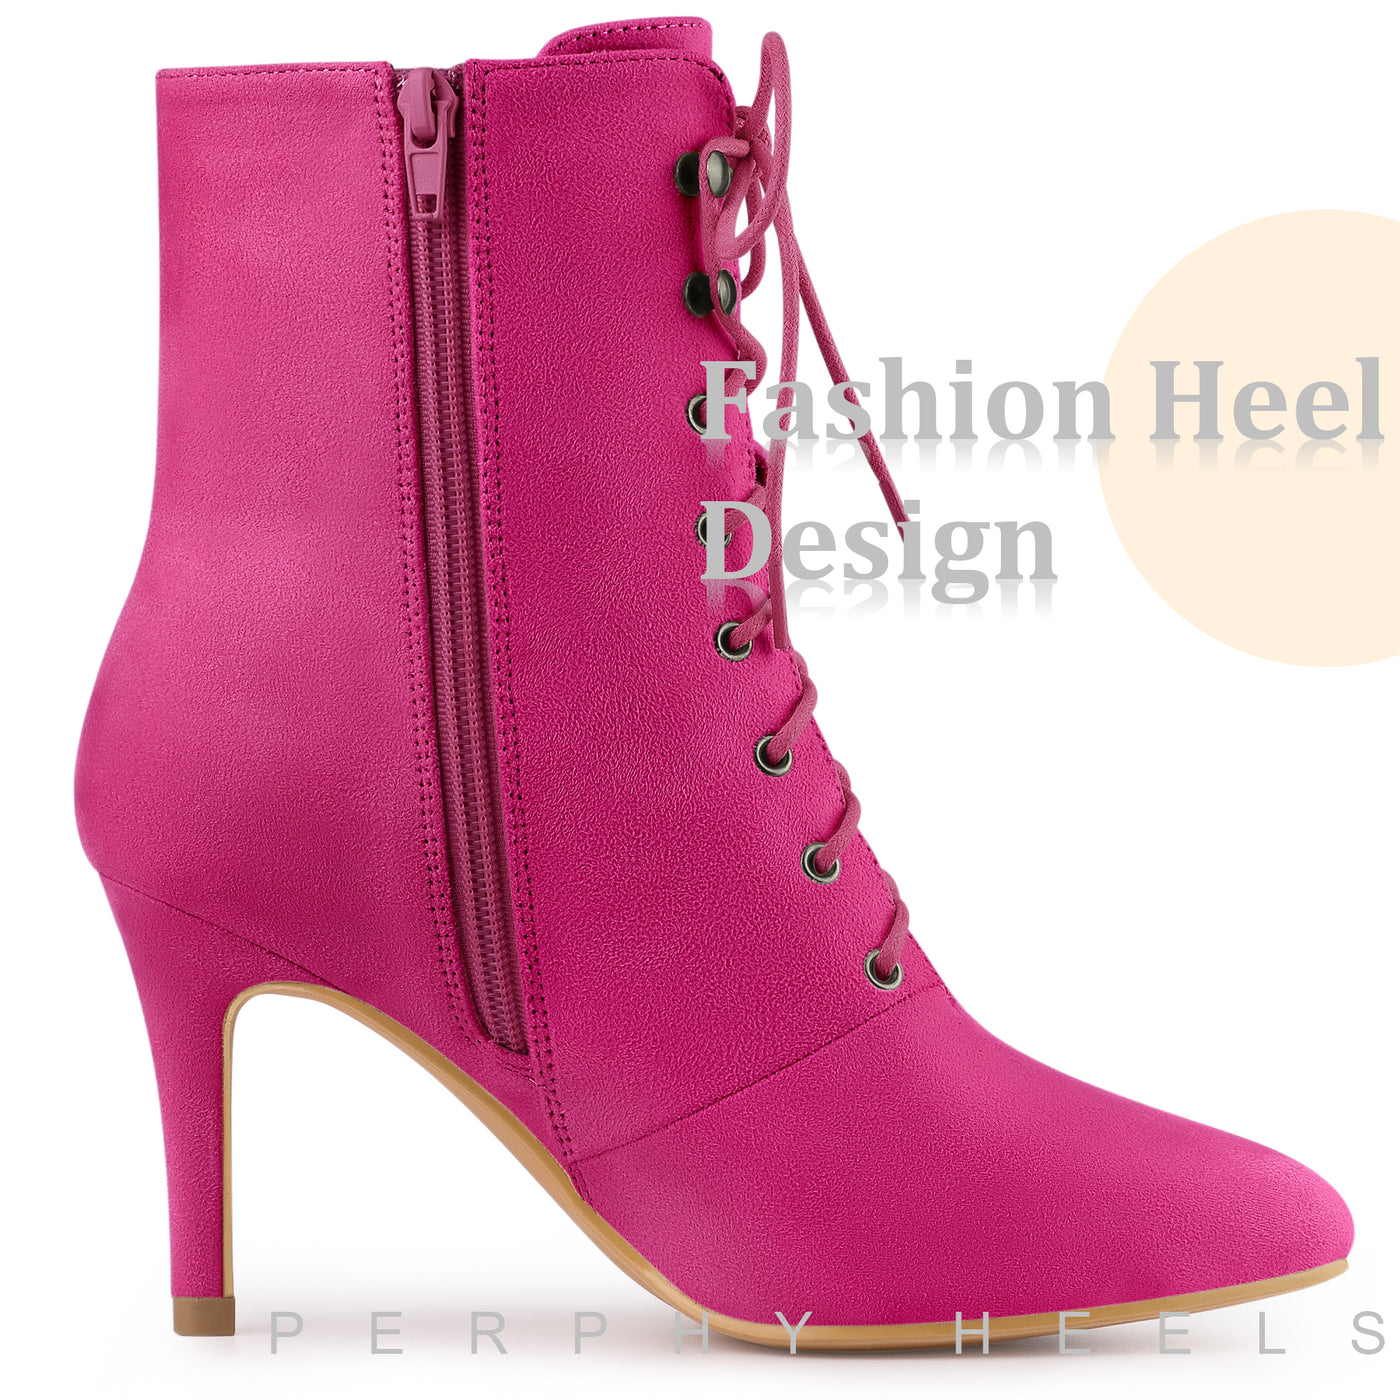 Bublédon Perphy Pointy Toe Zip Lace Up Stiletto Heel Ankle Boots for Women